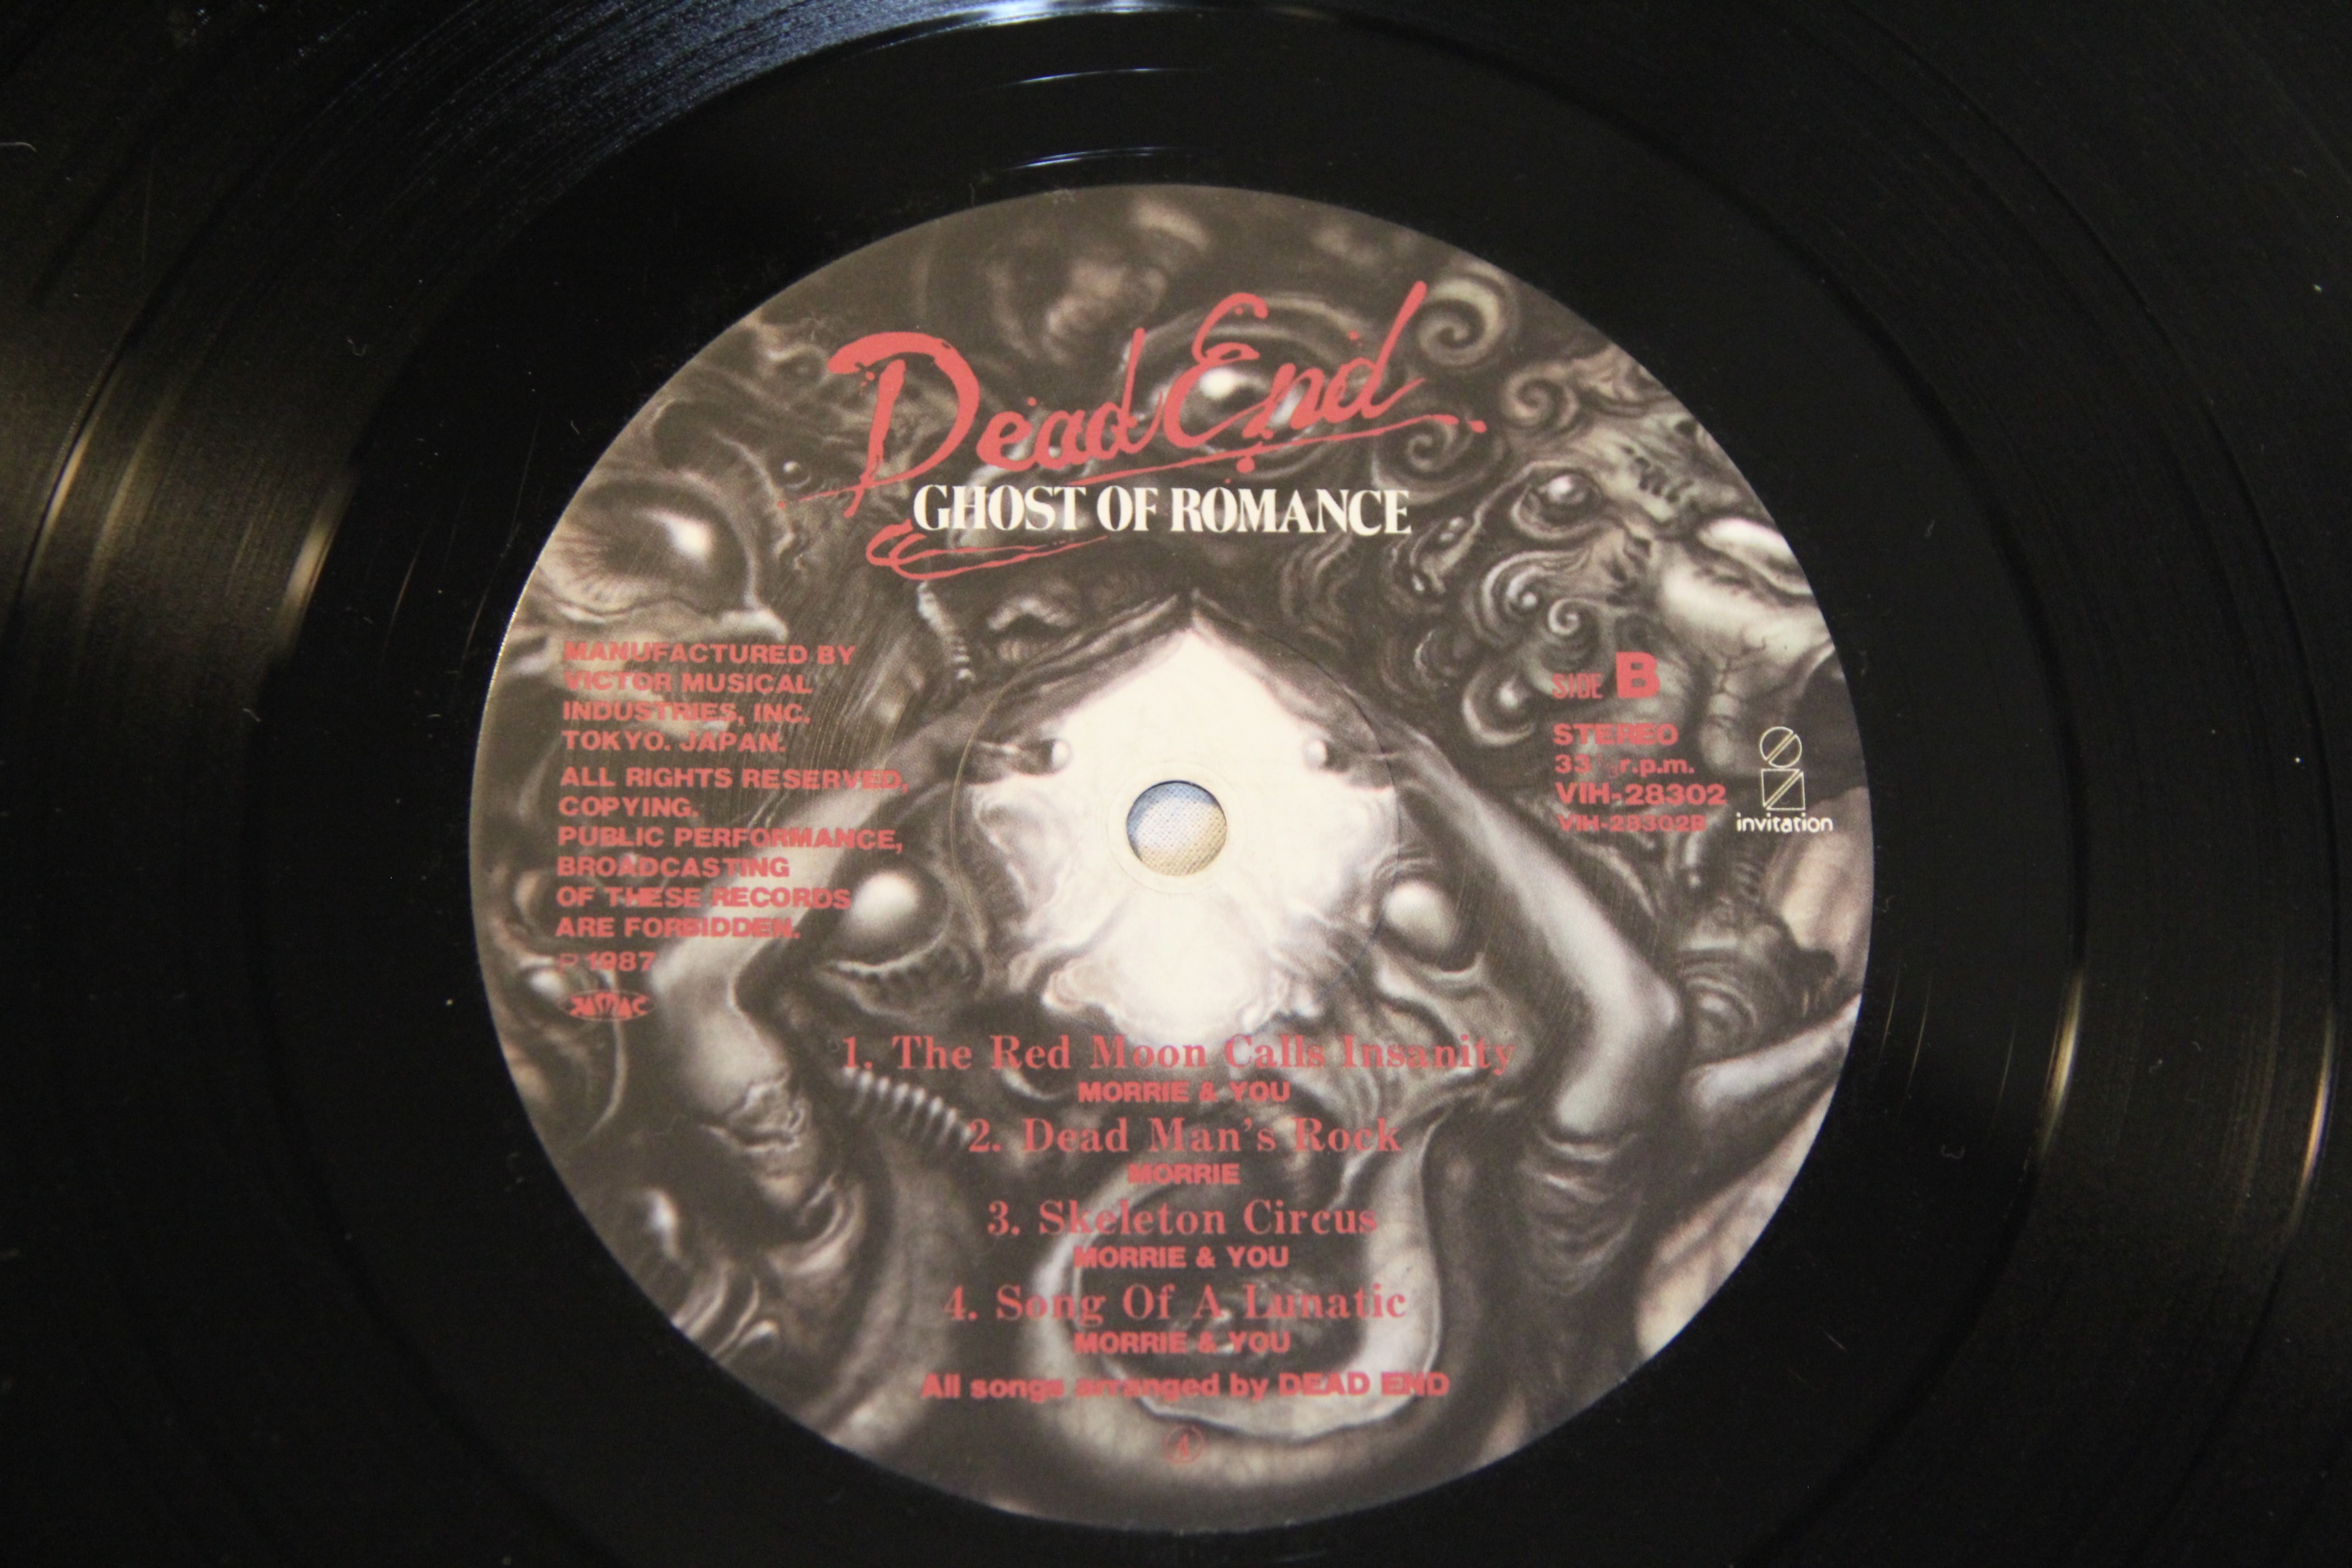 GHOST OF ROMANCE/dead end CD-